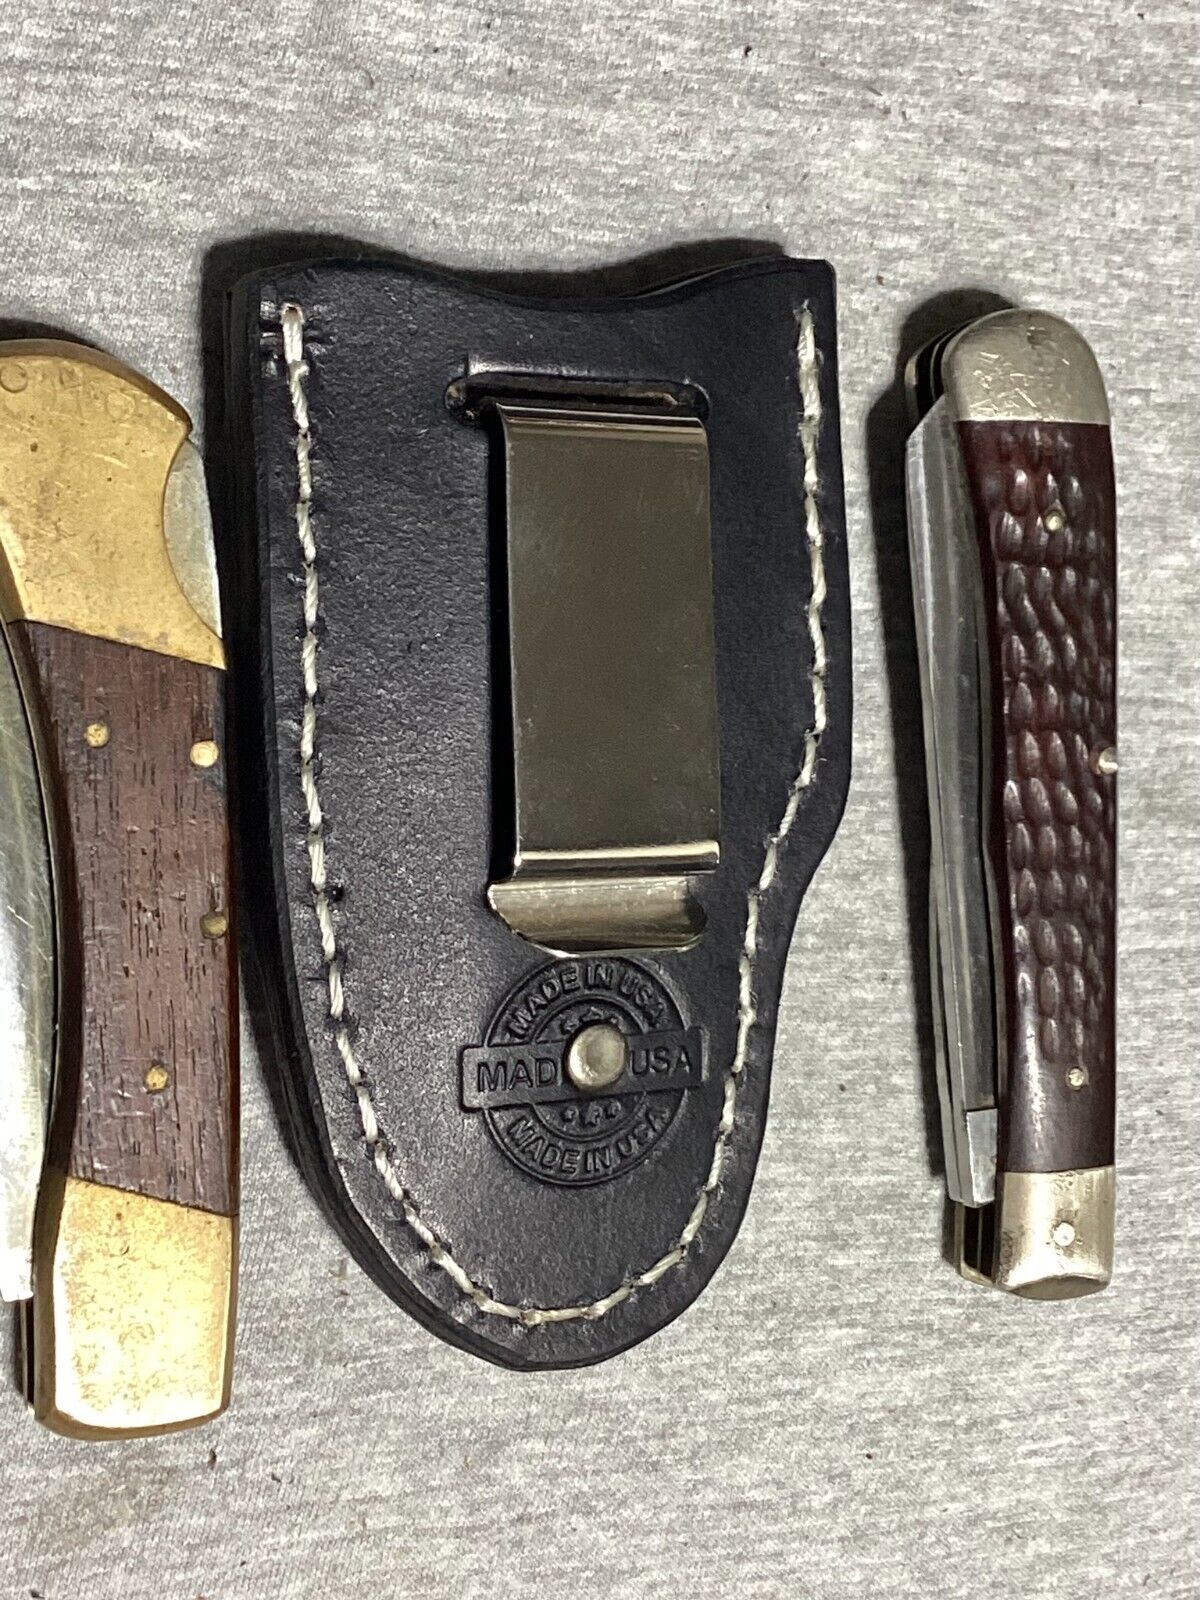 Personalized Buck 110, 112, Trapper, & Others Leather Folding Knife Clip Sheath